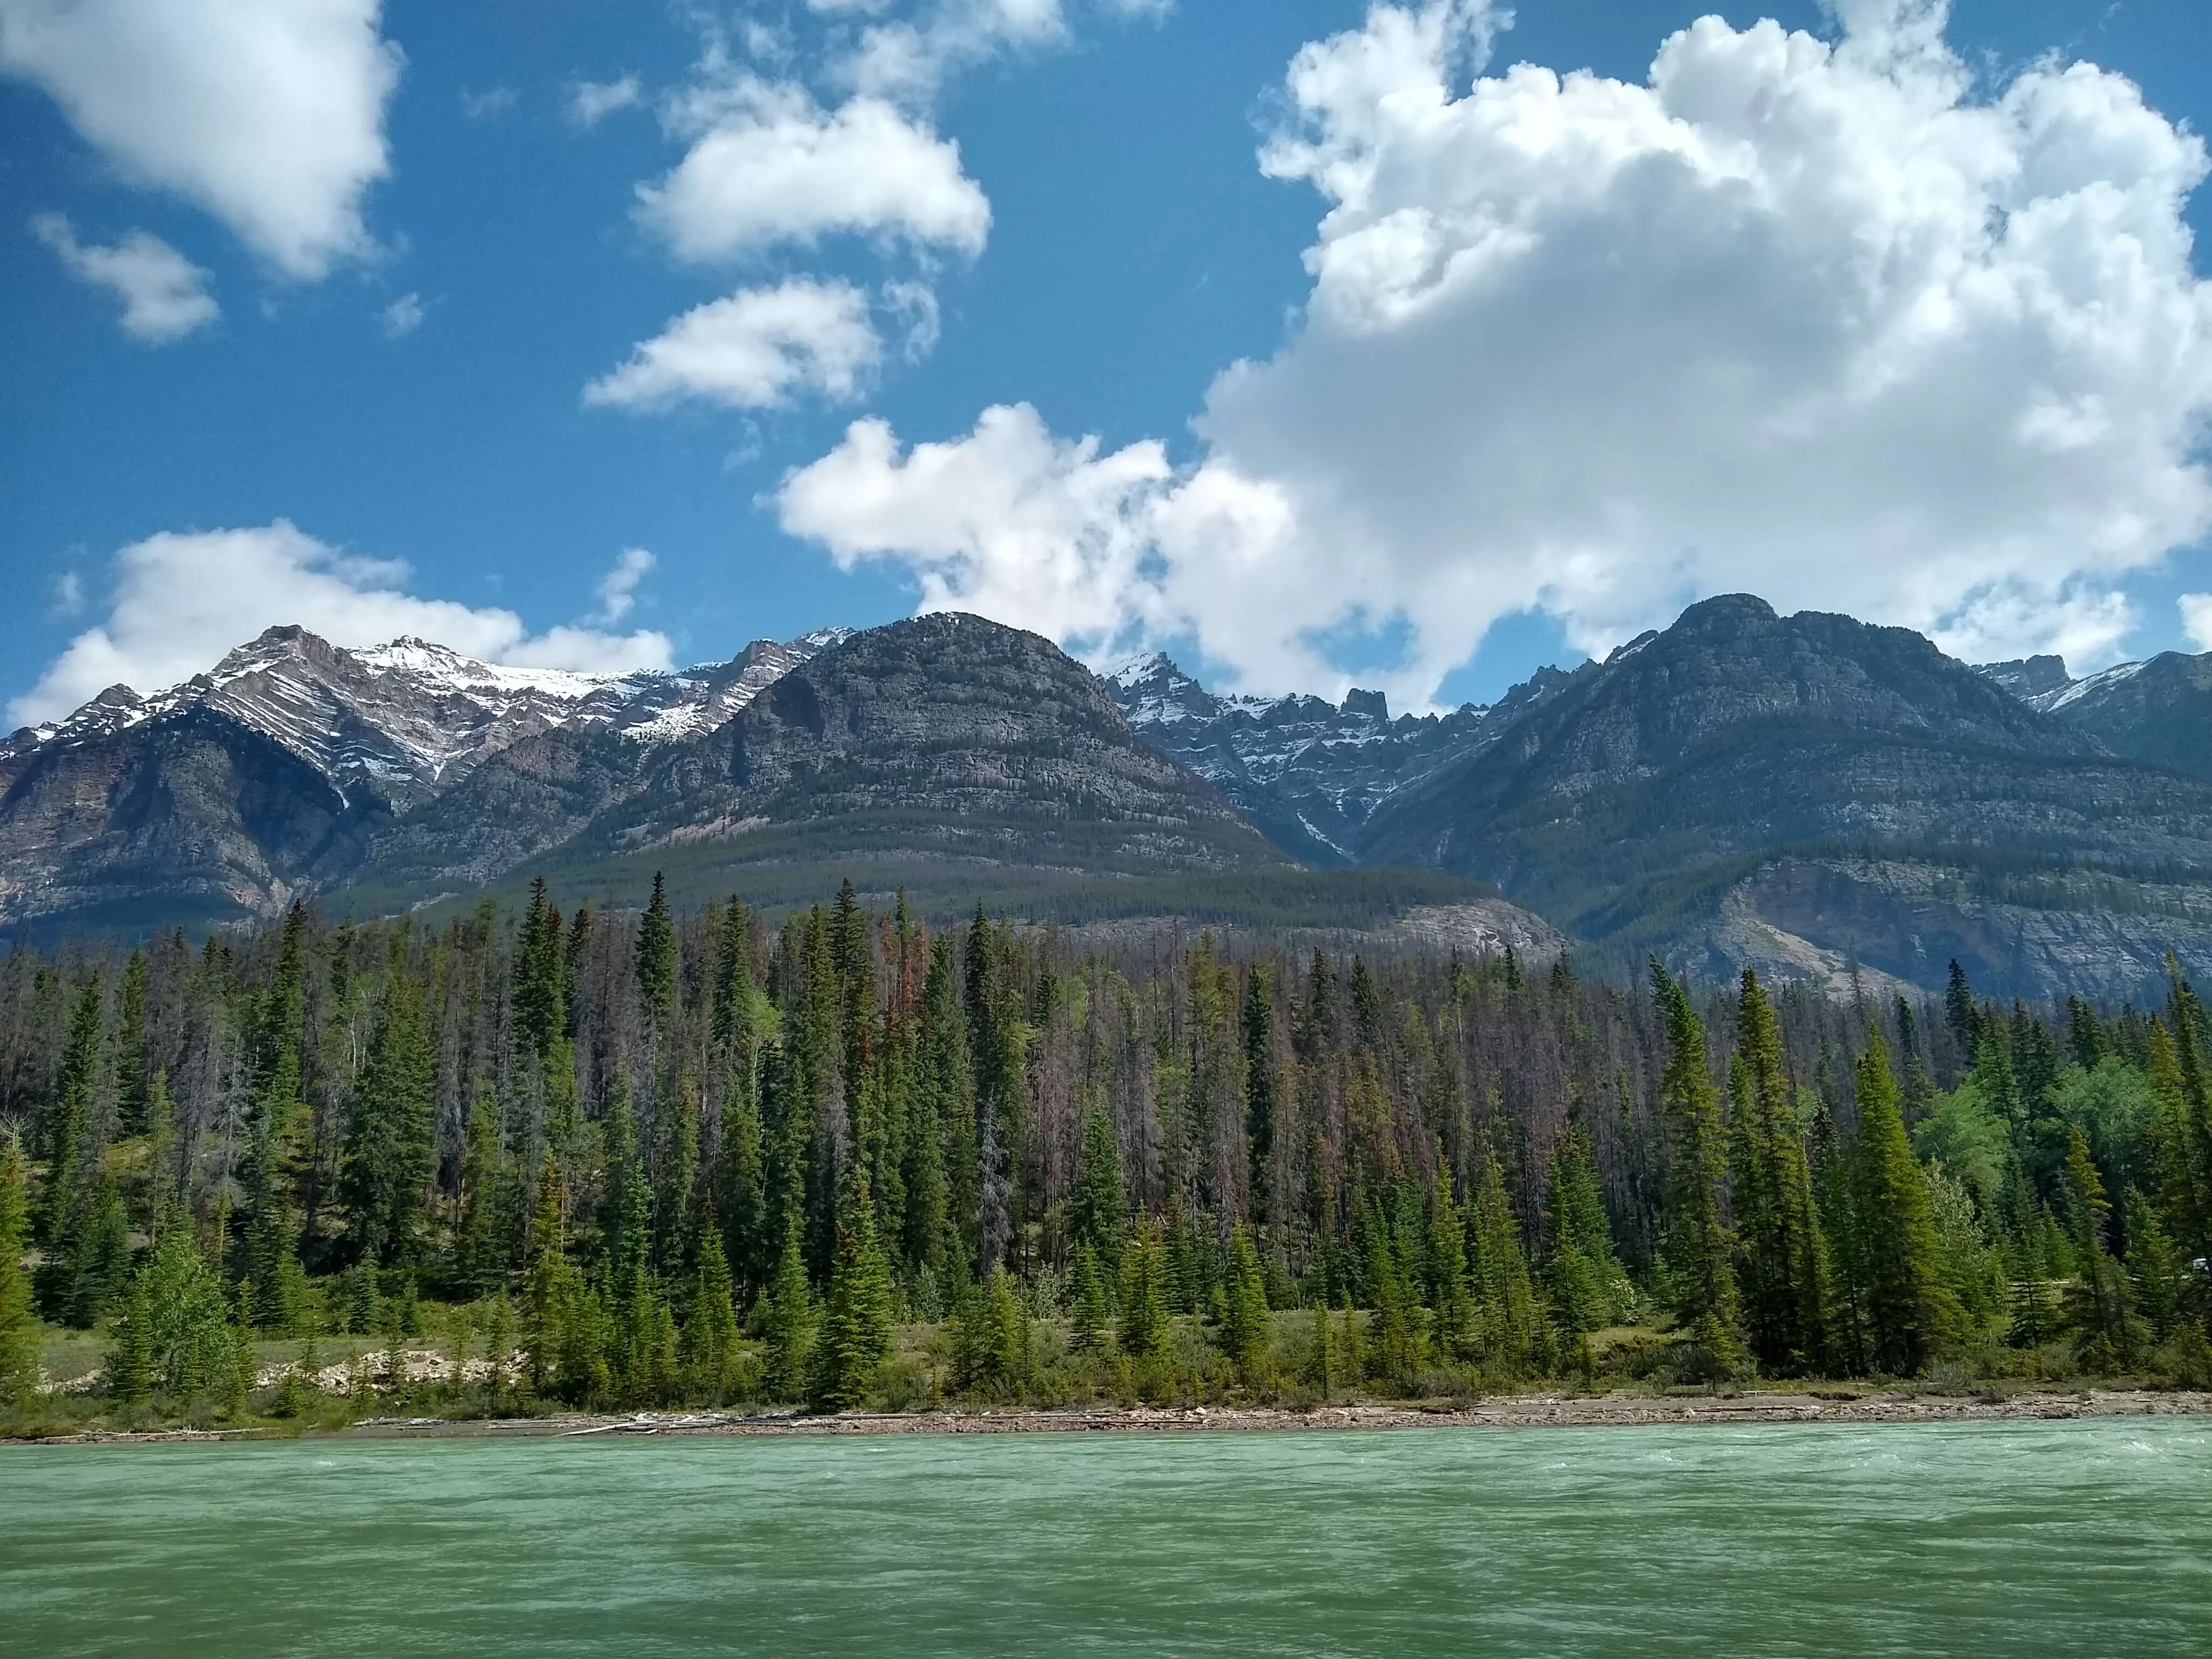 the Athabasca river, an aqua green river backed by snow-capped mountains